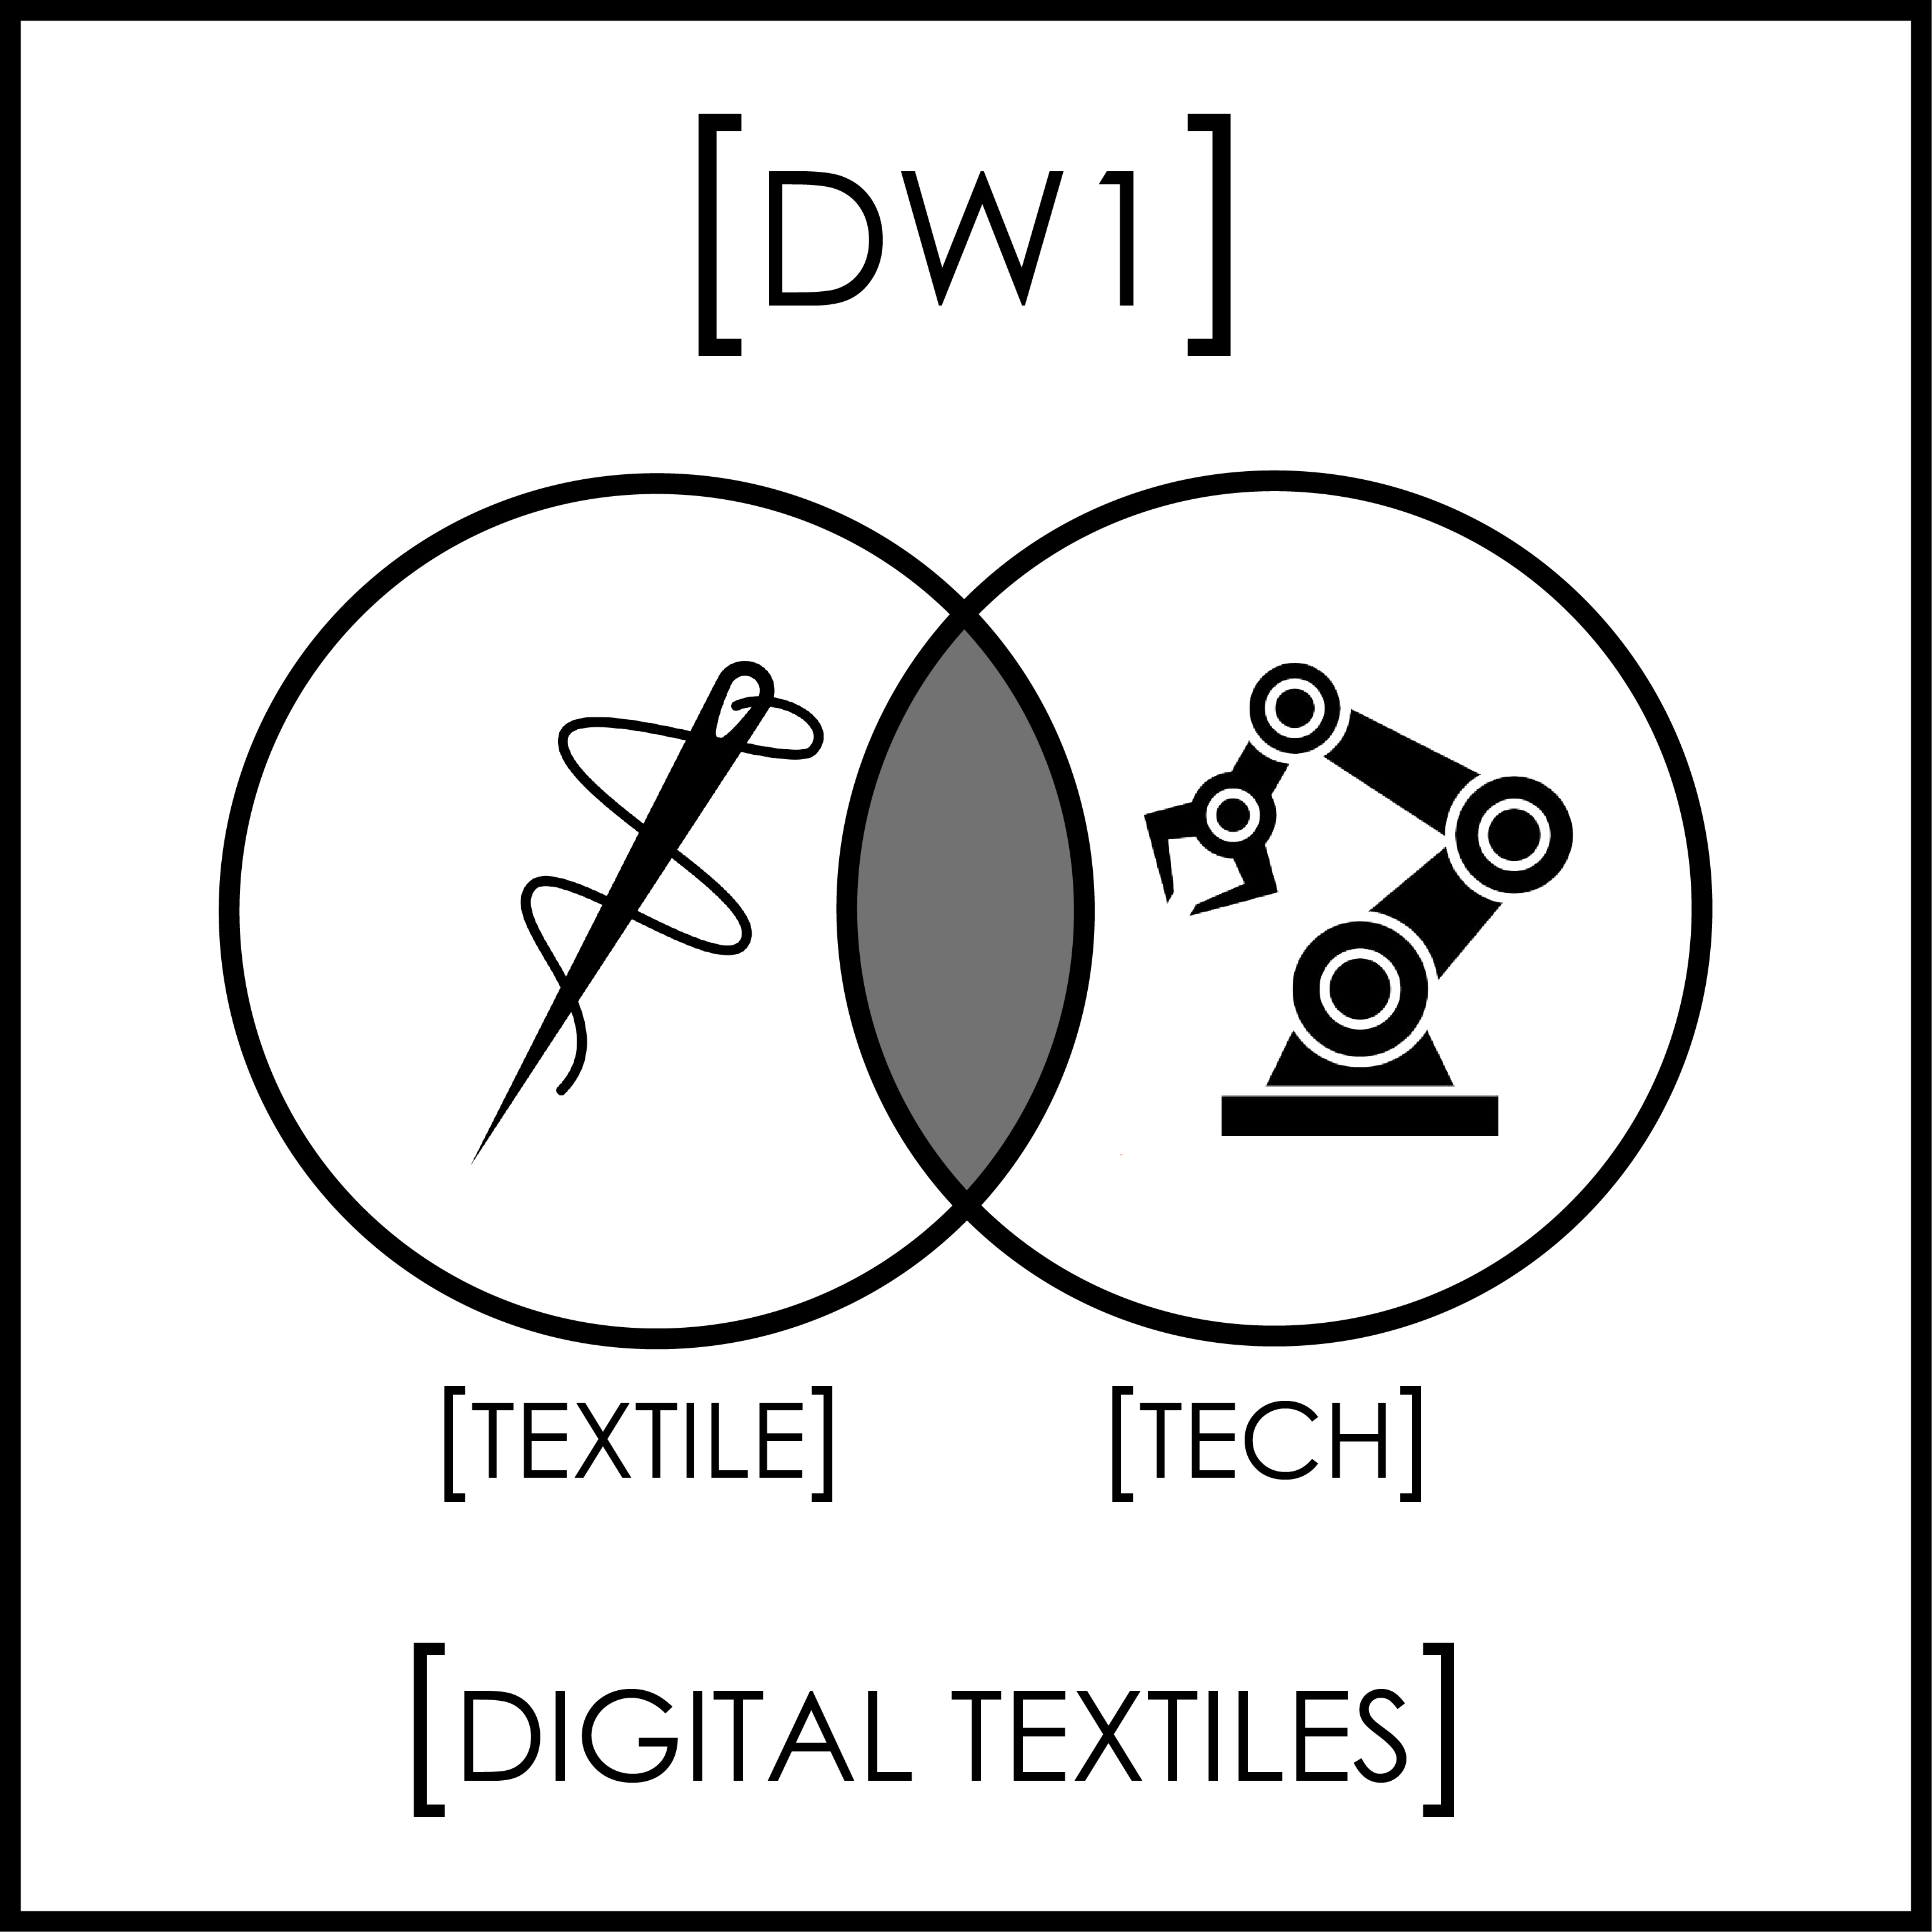 Diagram showing intersection of textiles and technology